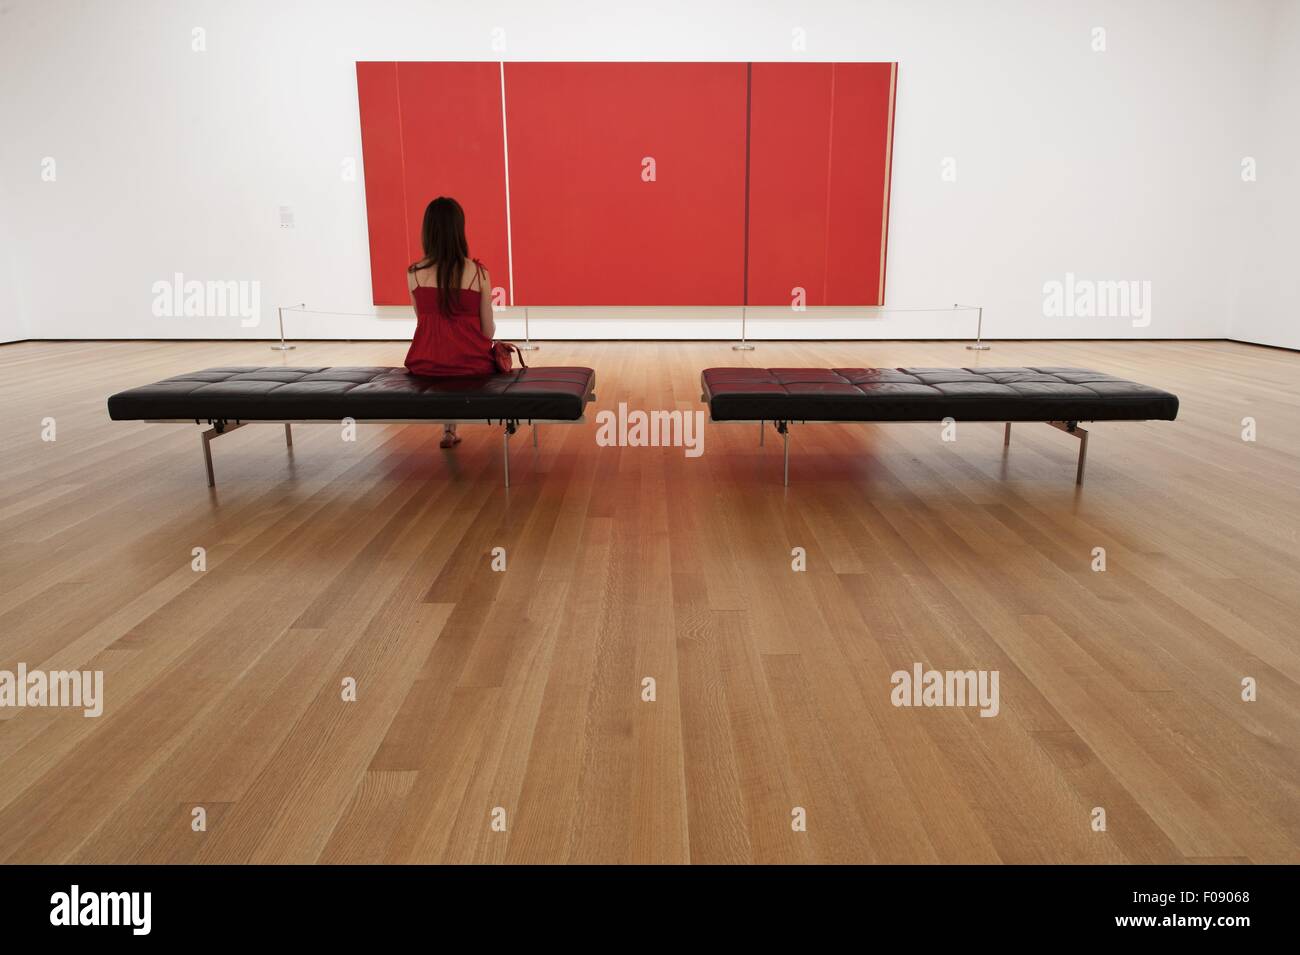 Rear view of woman sitting and looking red image at Museum of Modern Art, New York, USA Stock Photo